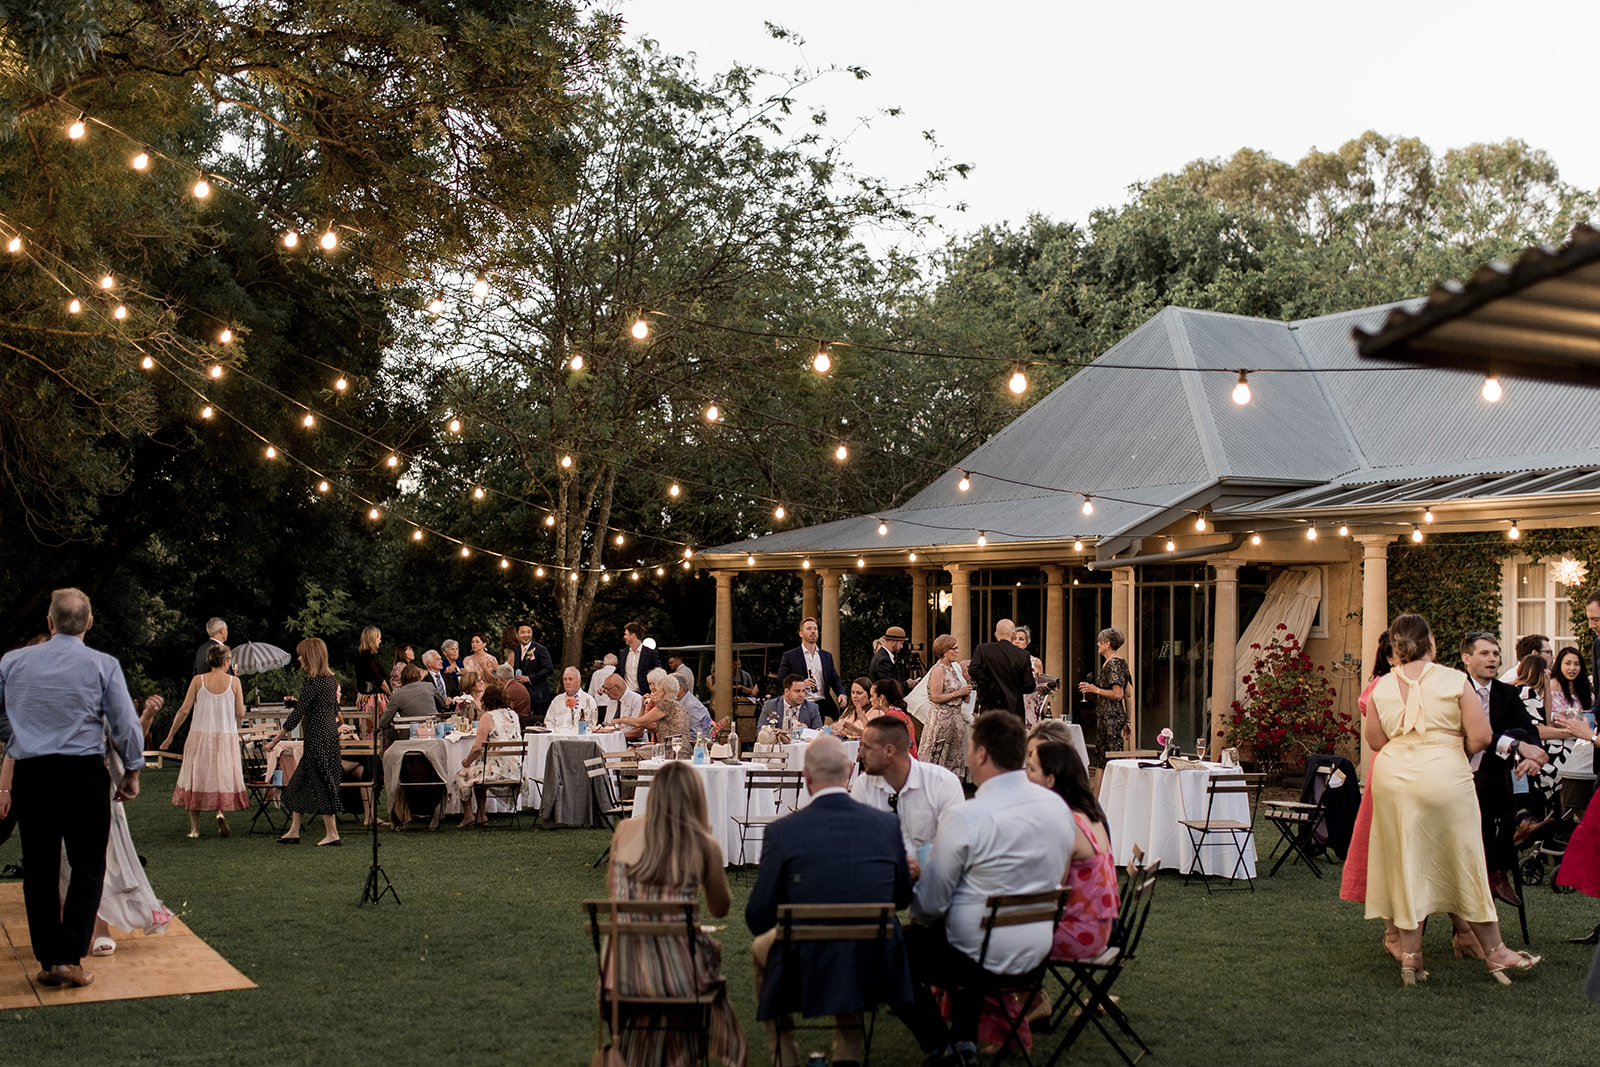 Al Ru Farm is a green sanctuary in the Adelaide Hills and considered one of the most popular garden wedding venues in South Australia, offering multiple function spaces, flexible beverages and onsite accommodation.